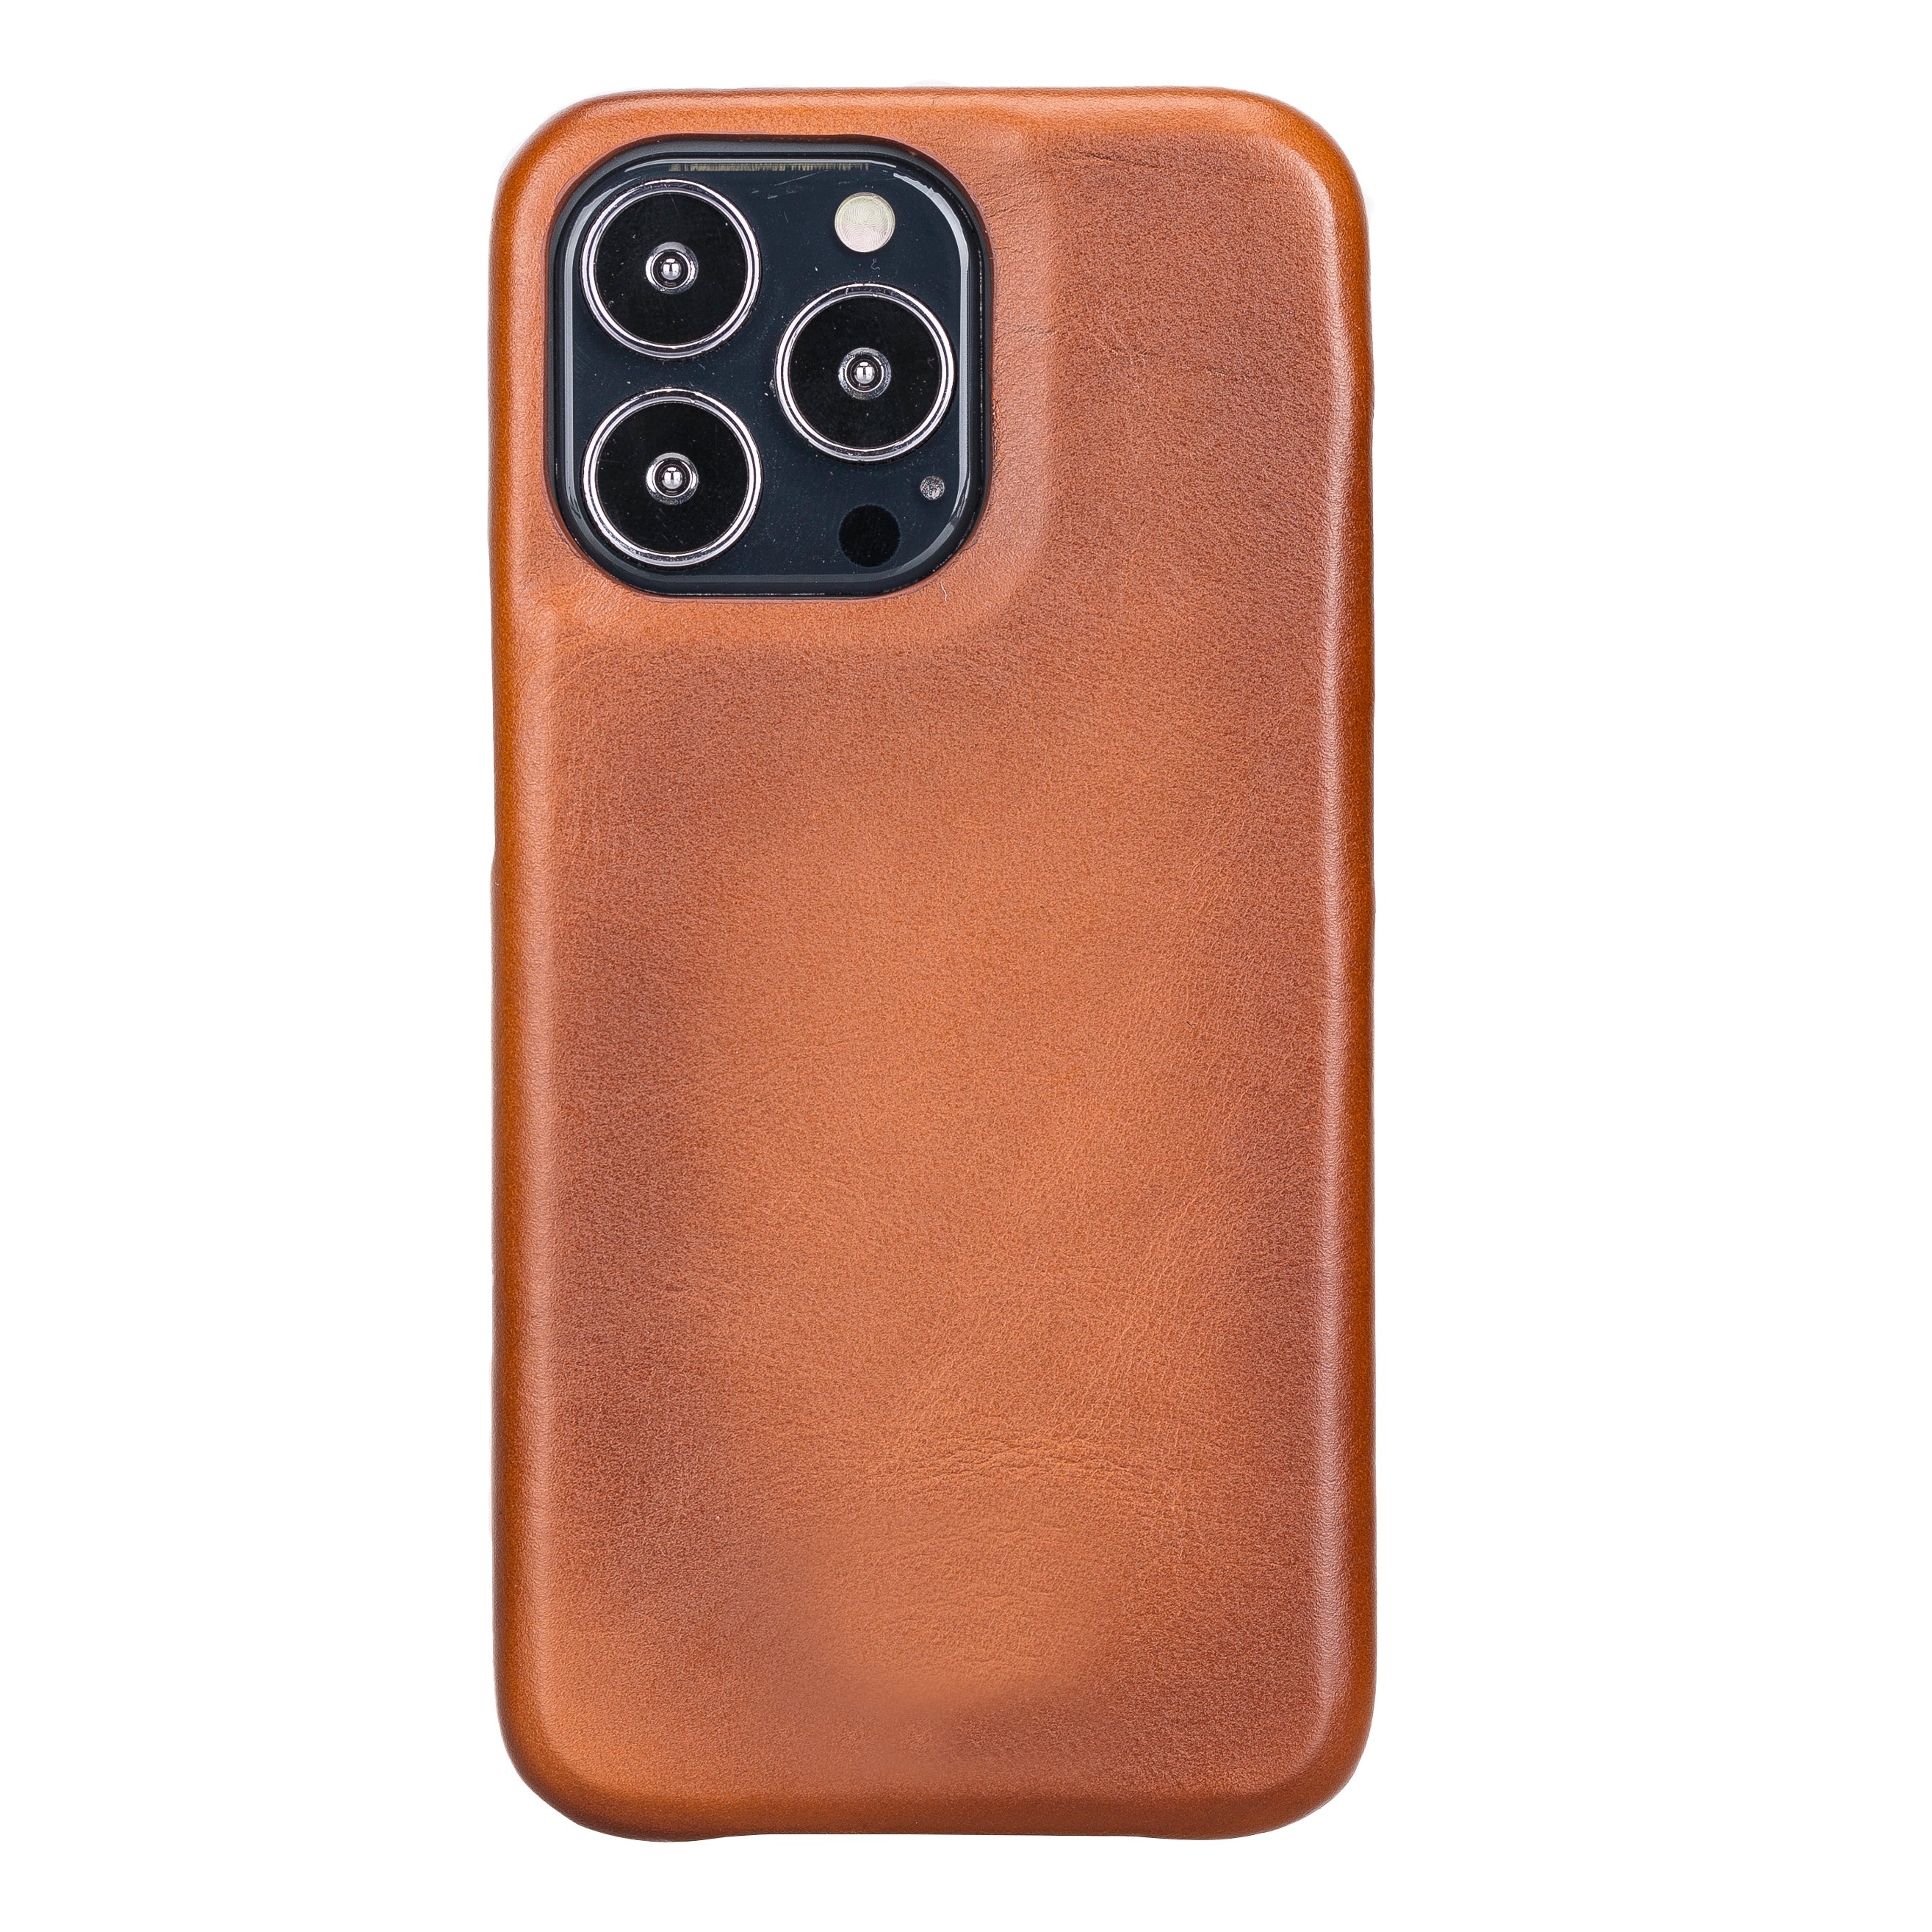 iPhone 14 PRO (6.1") Leather Snap on Cover Case, Burnished Tan